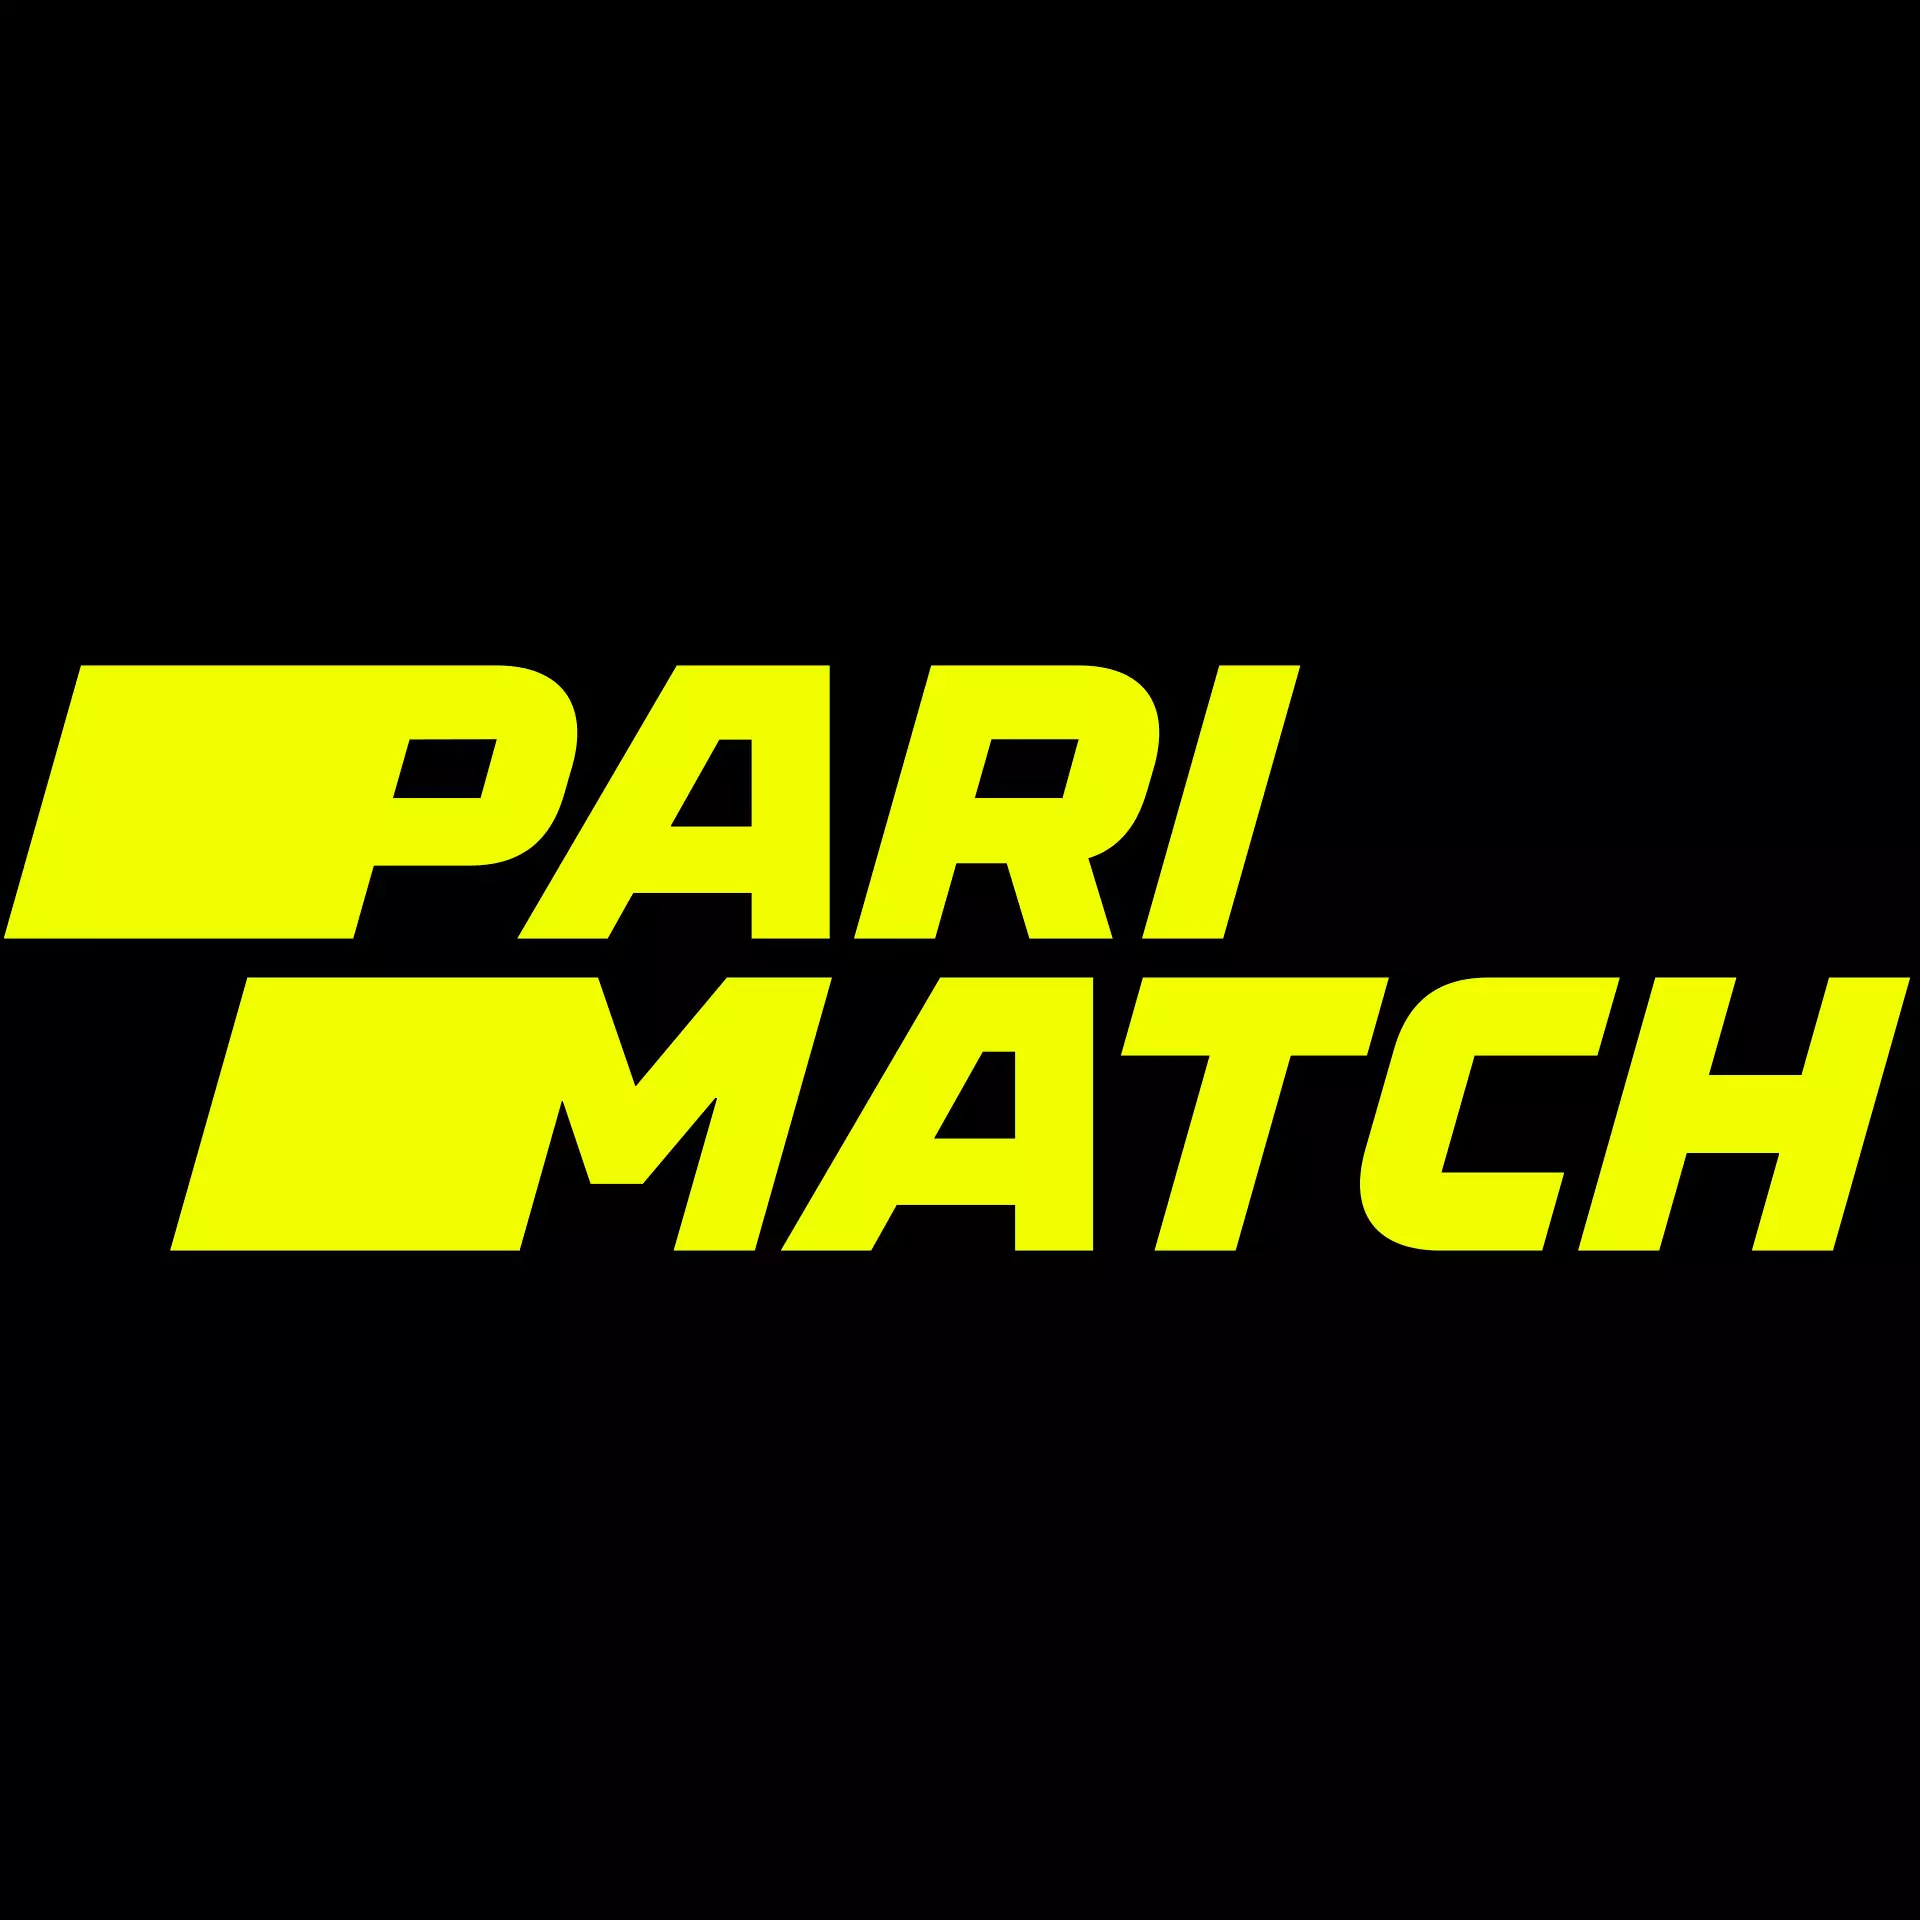 Parimatch is most popular cricket betting sites in Pakistan.